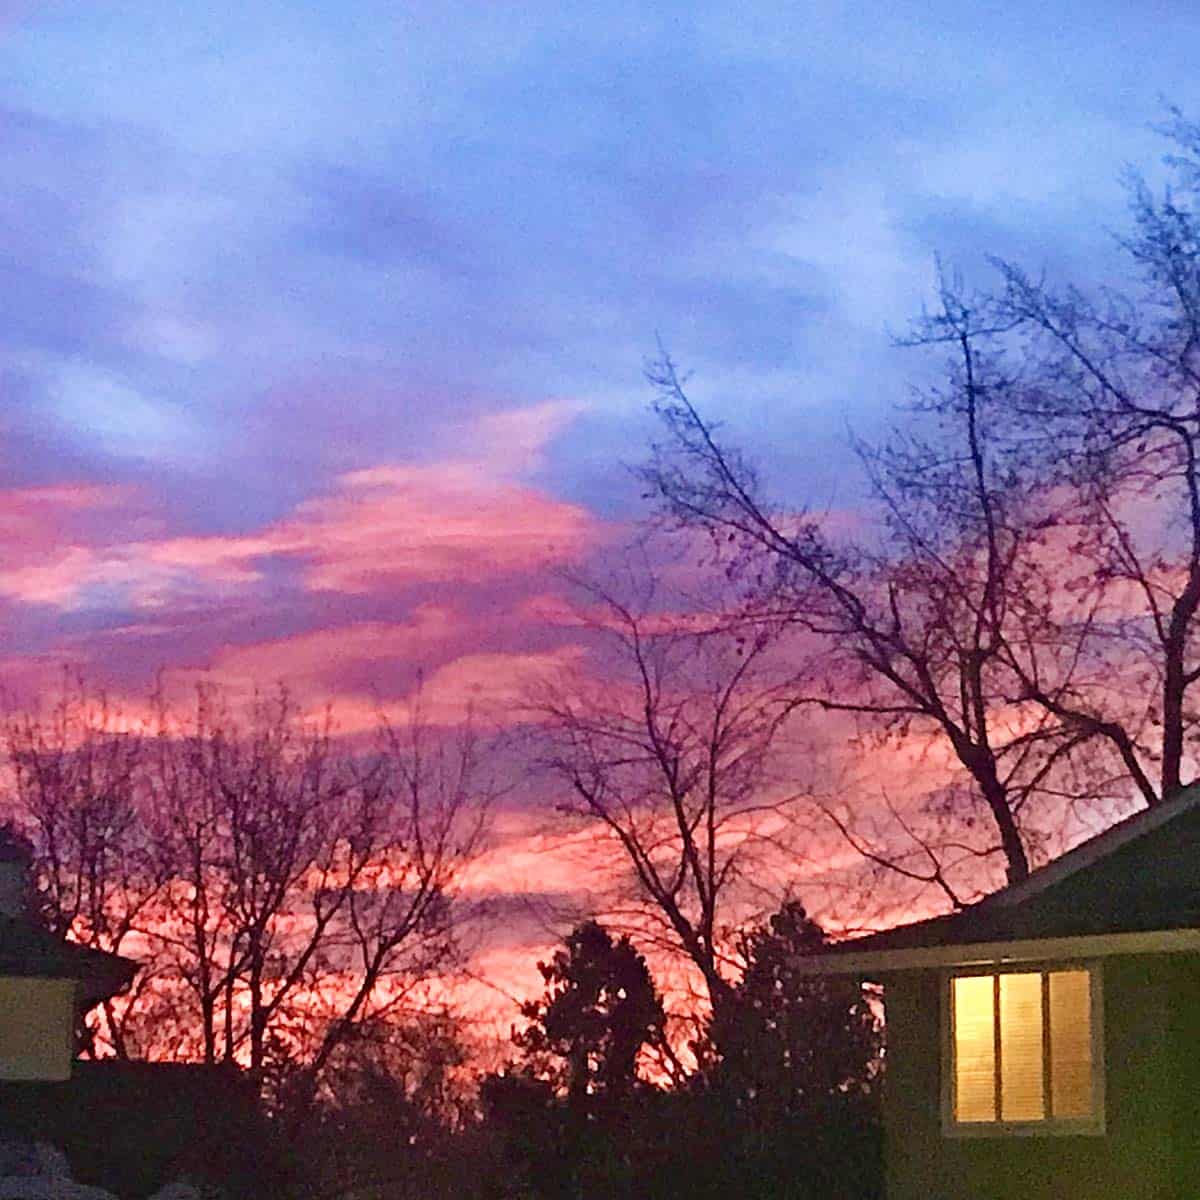 A beautiful sunrise with blue and pink clouds and a house to the right with a light on in the window.